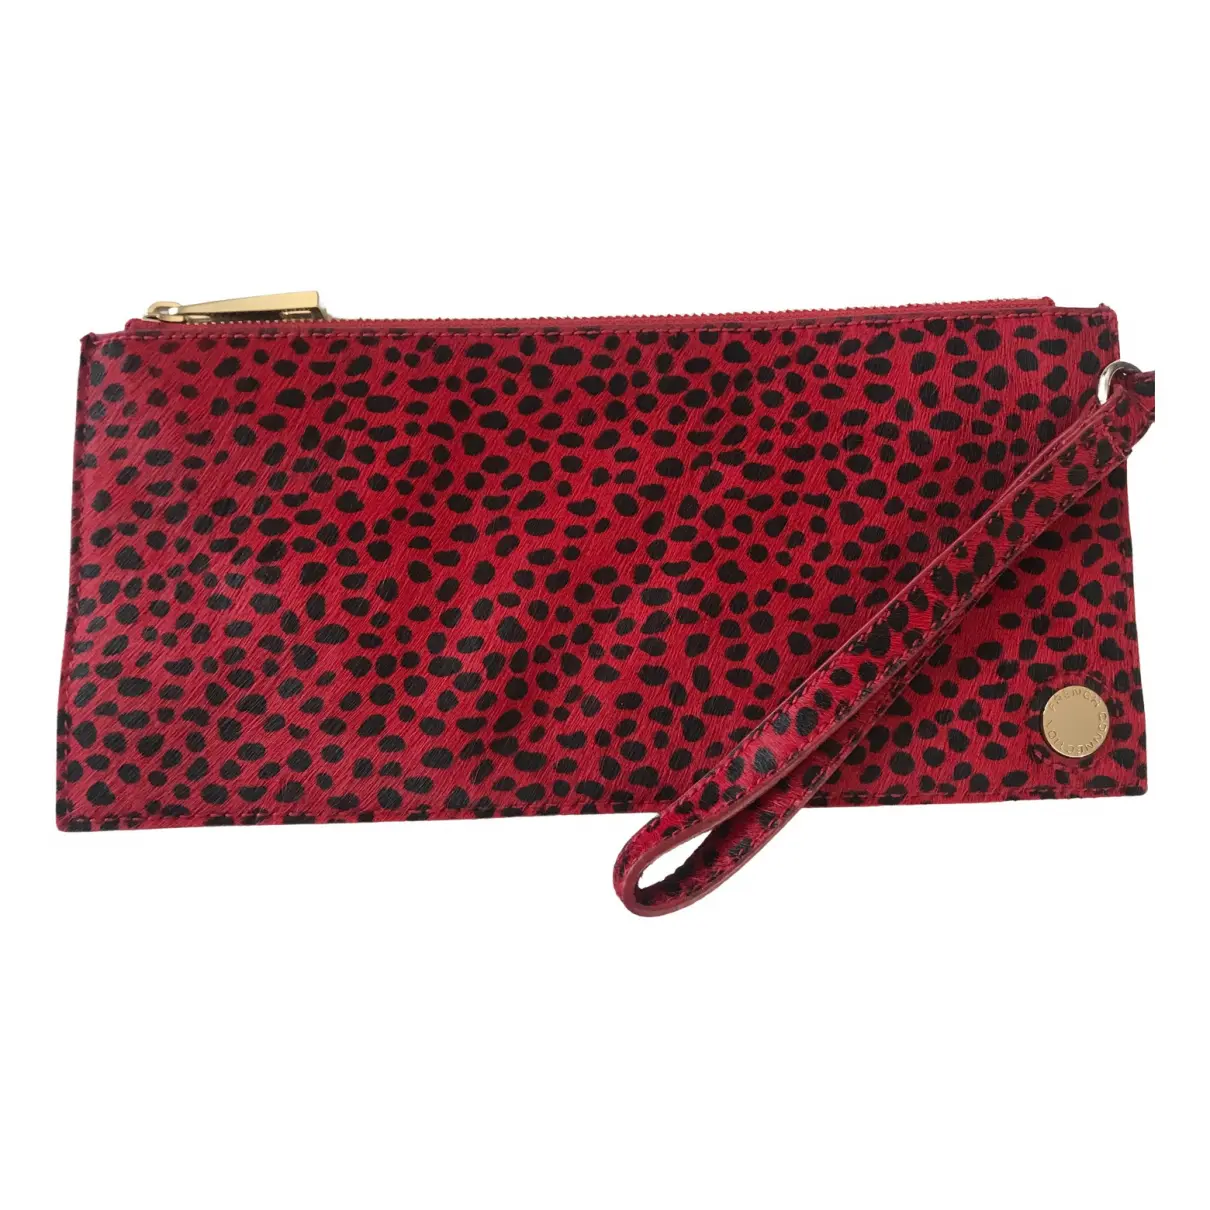 Pony-style calfskin clutch bag French Connection